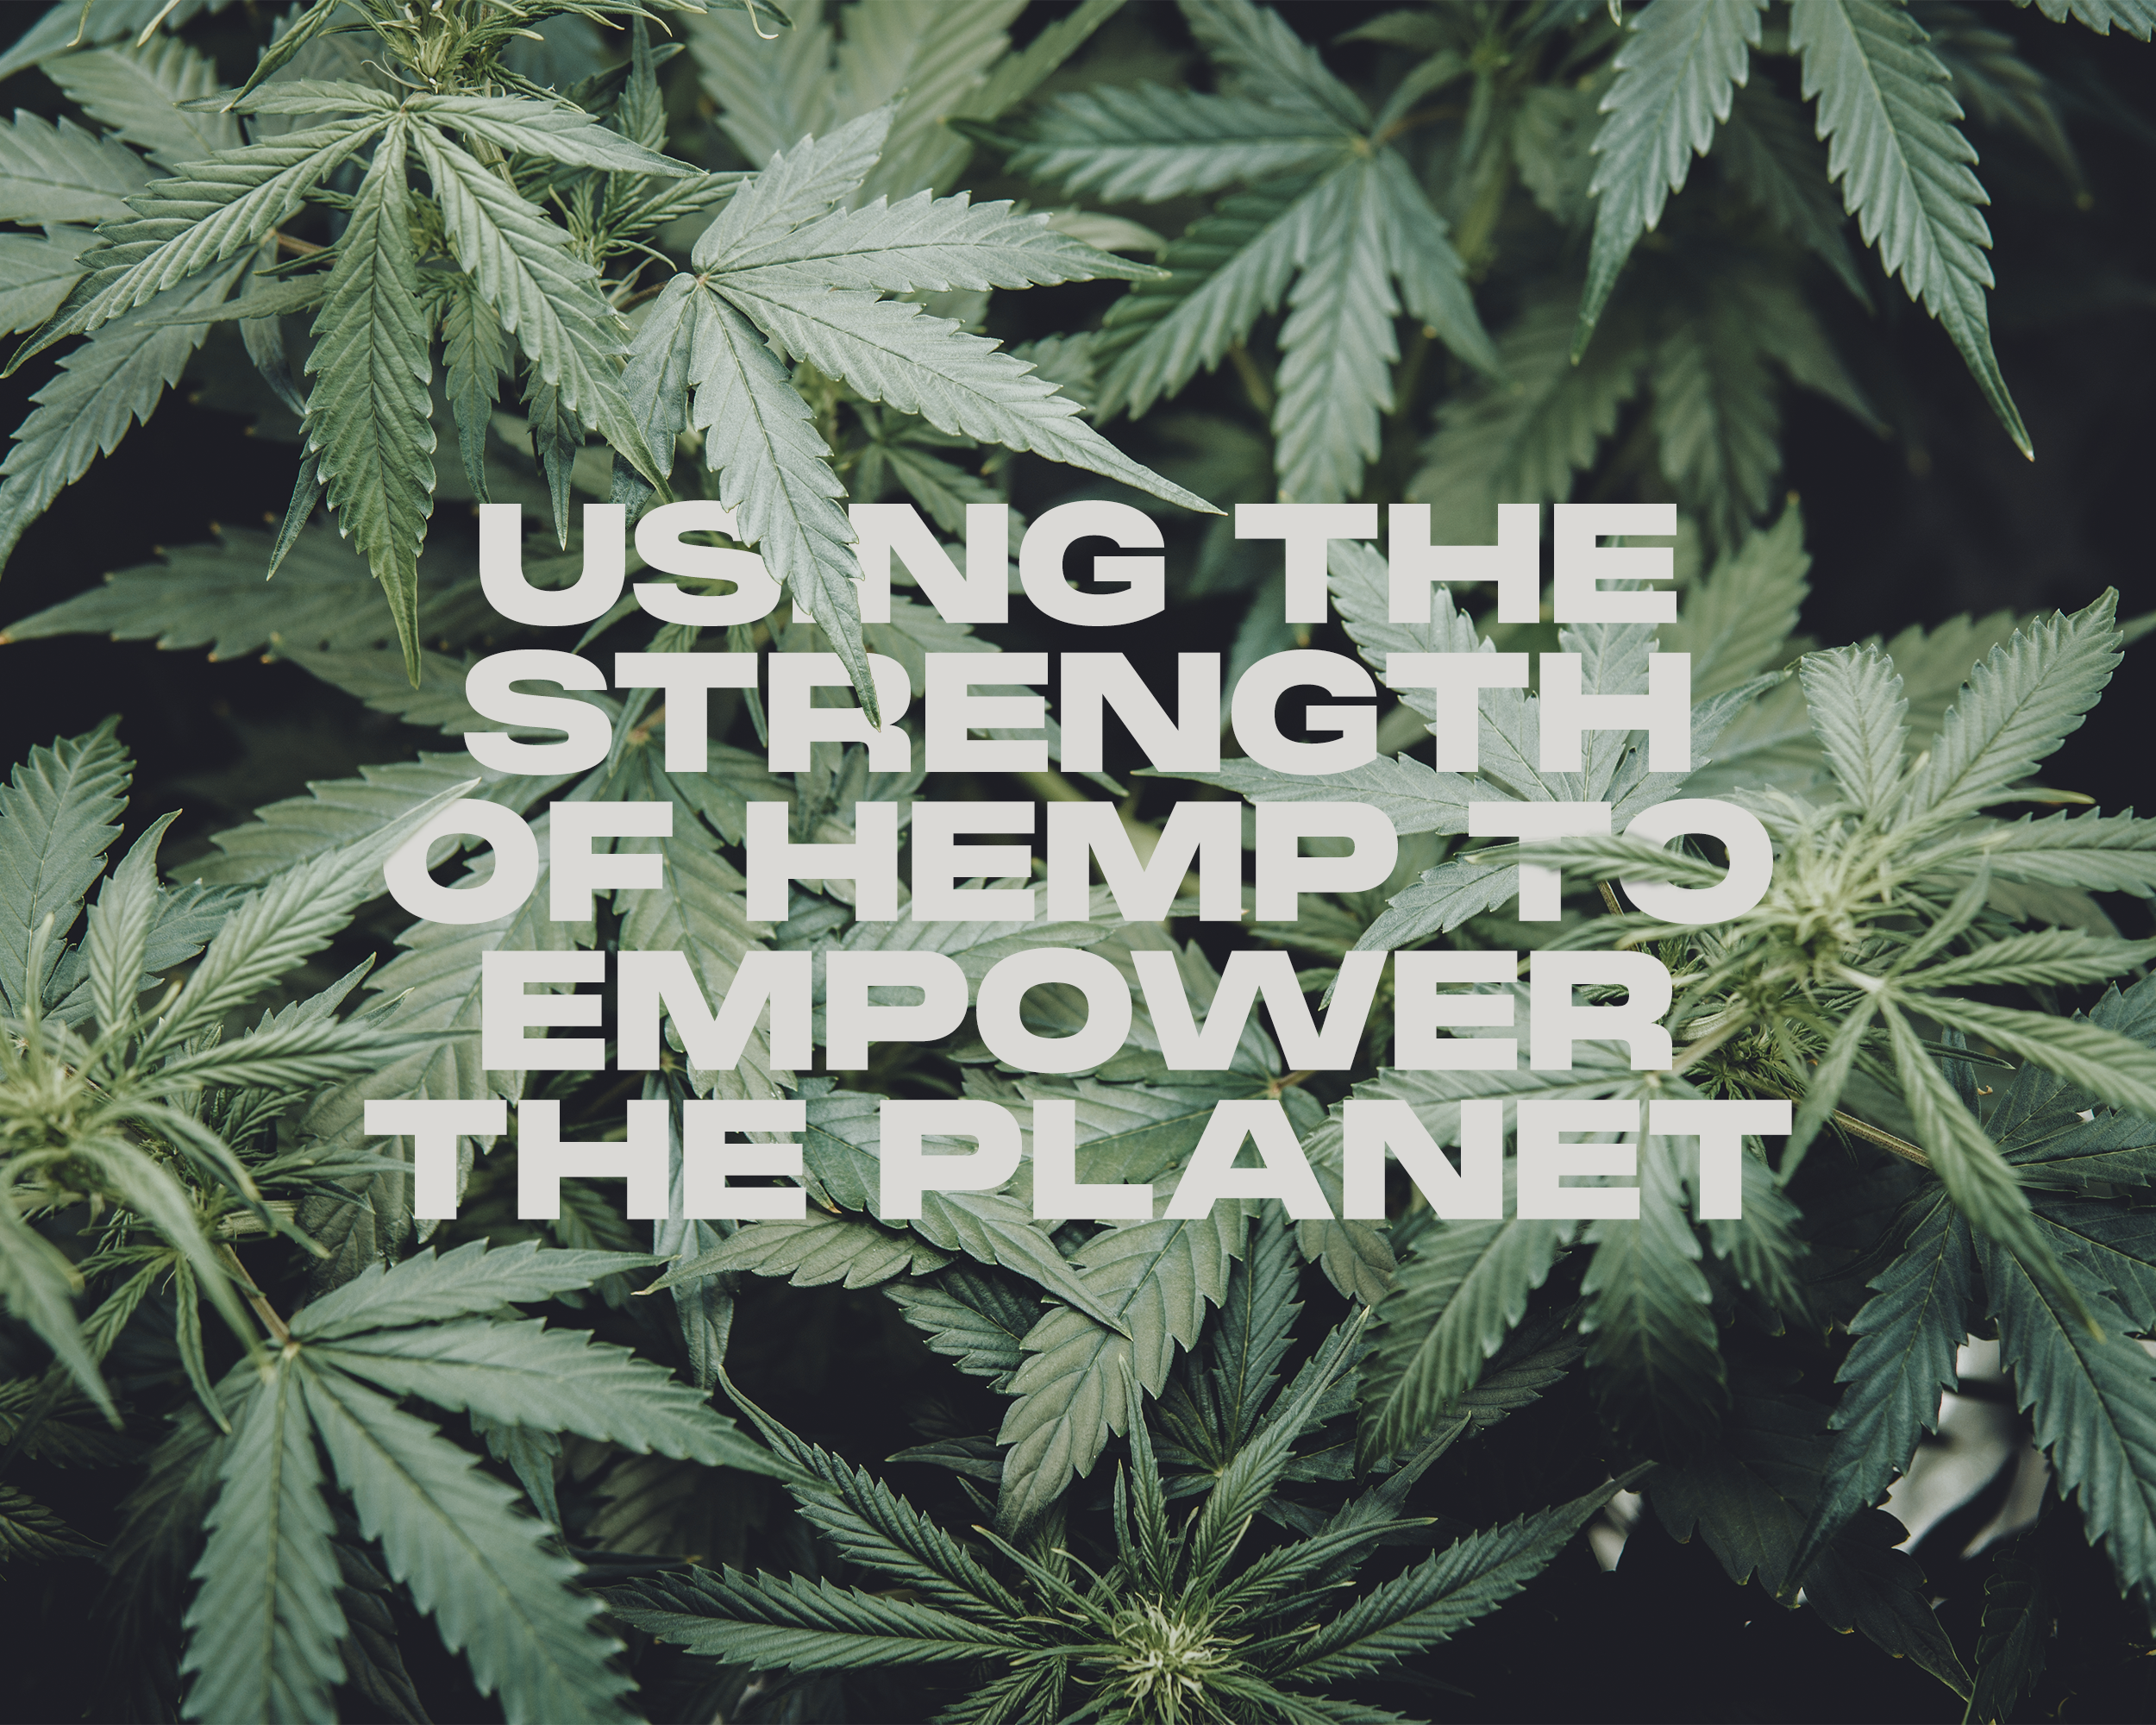 Tagline: Using the power of hemp to empower the planet